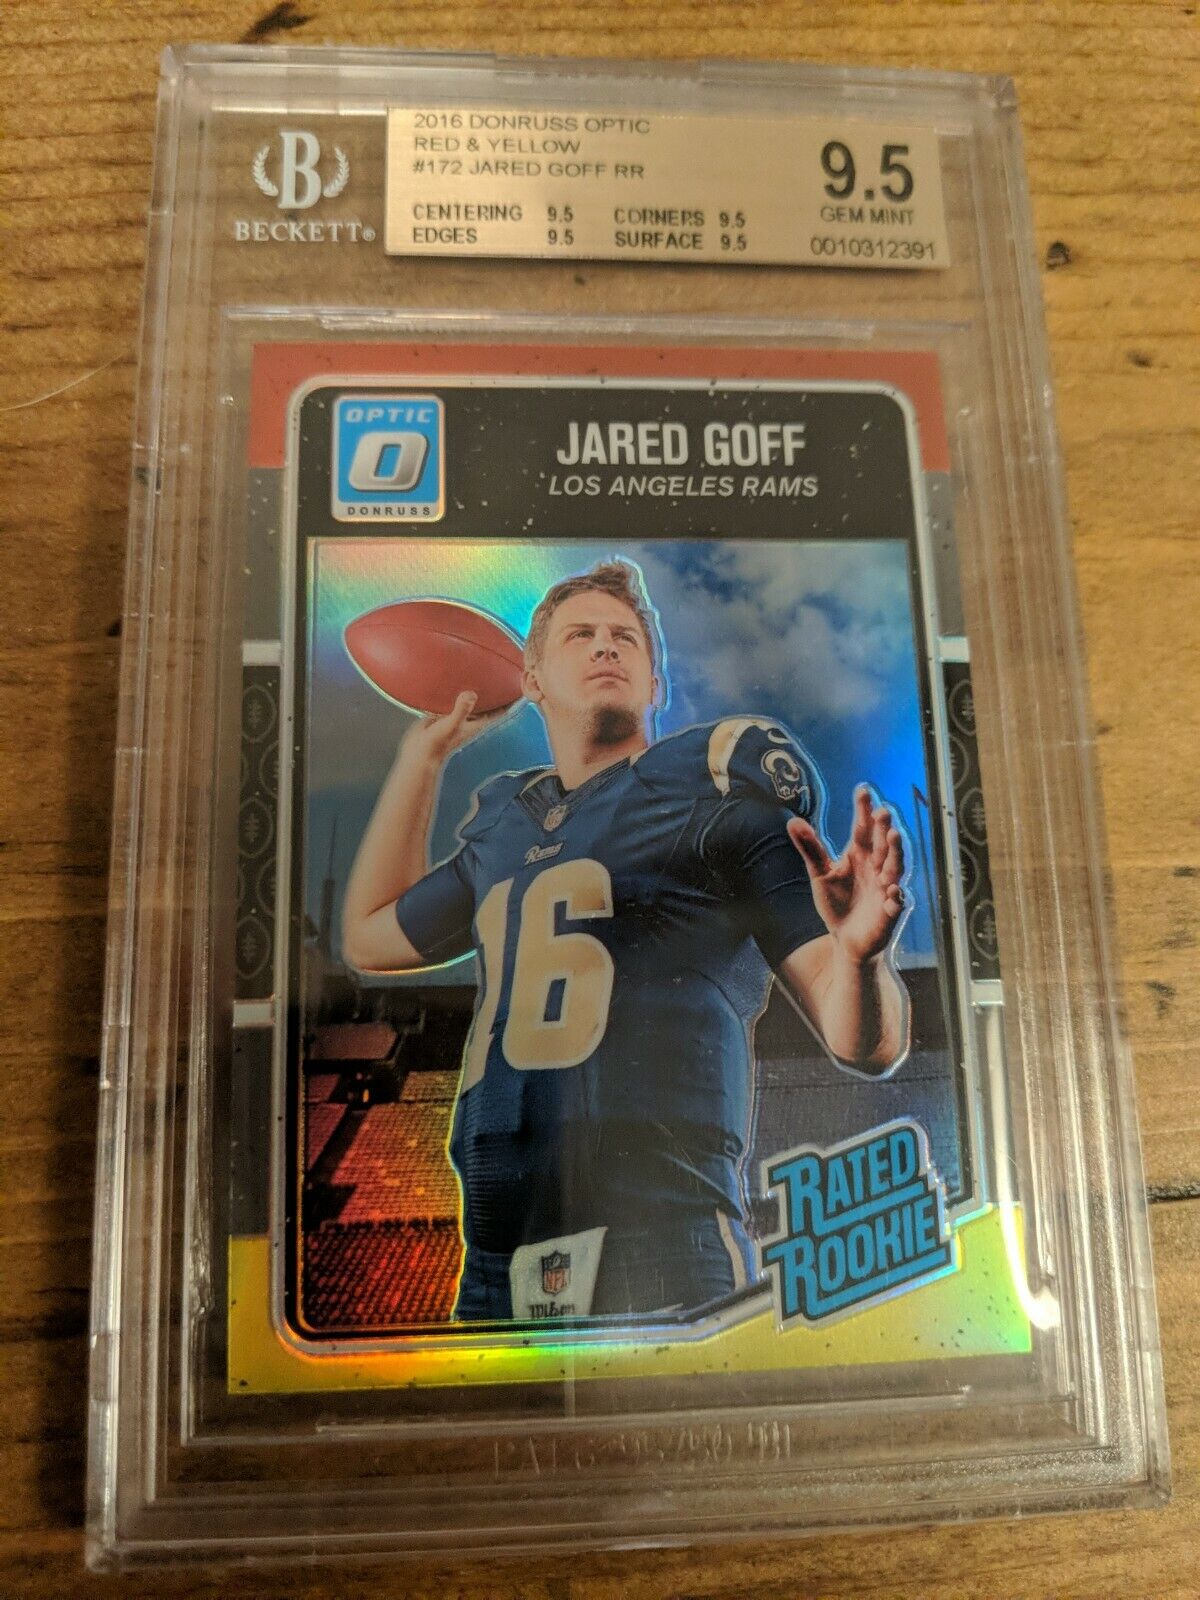 2016 Panini Donruss Optic Jared Goff Rated Rookie Holo Red Yellow BGS 9.5 TRUE